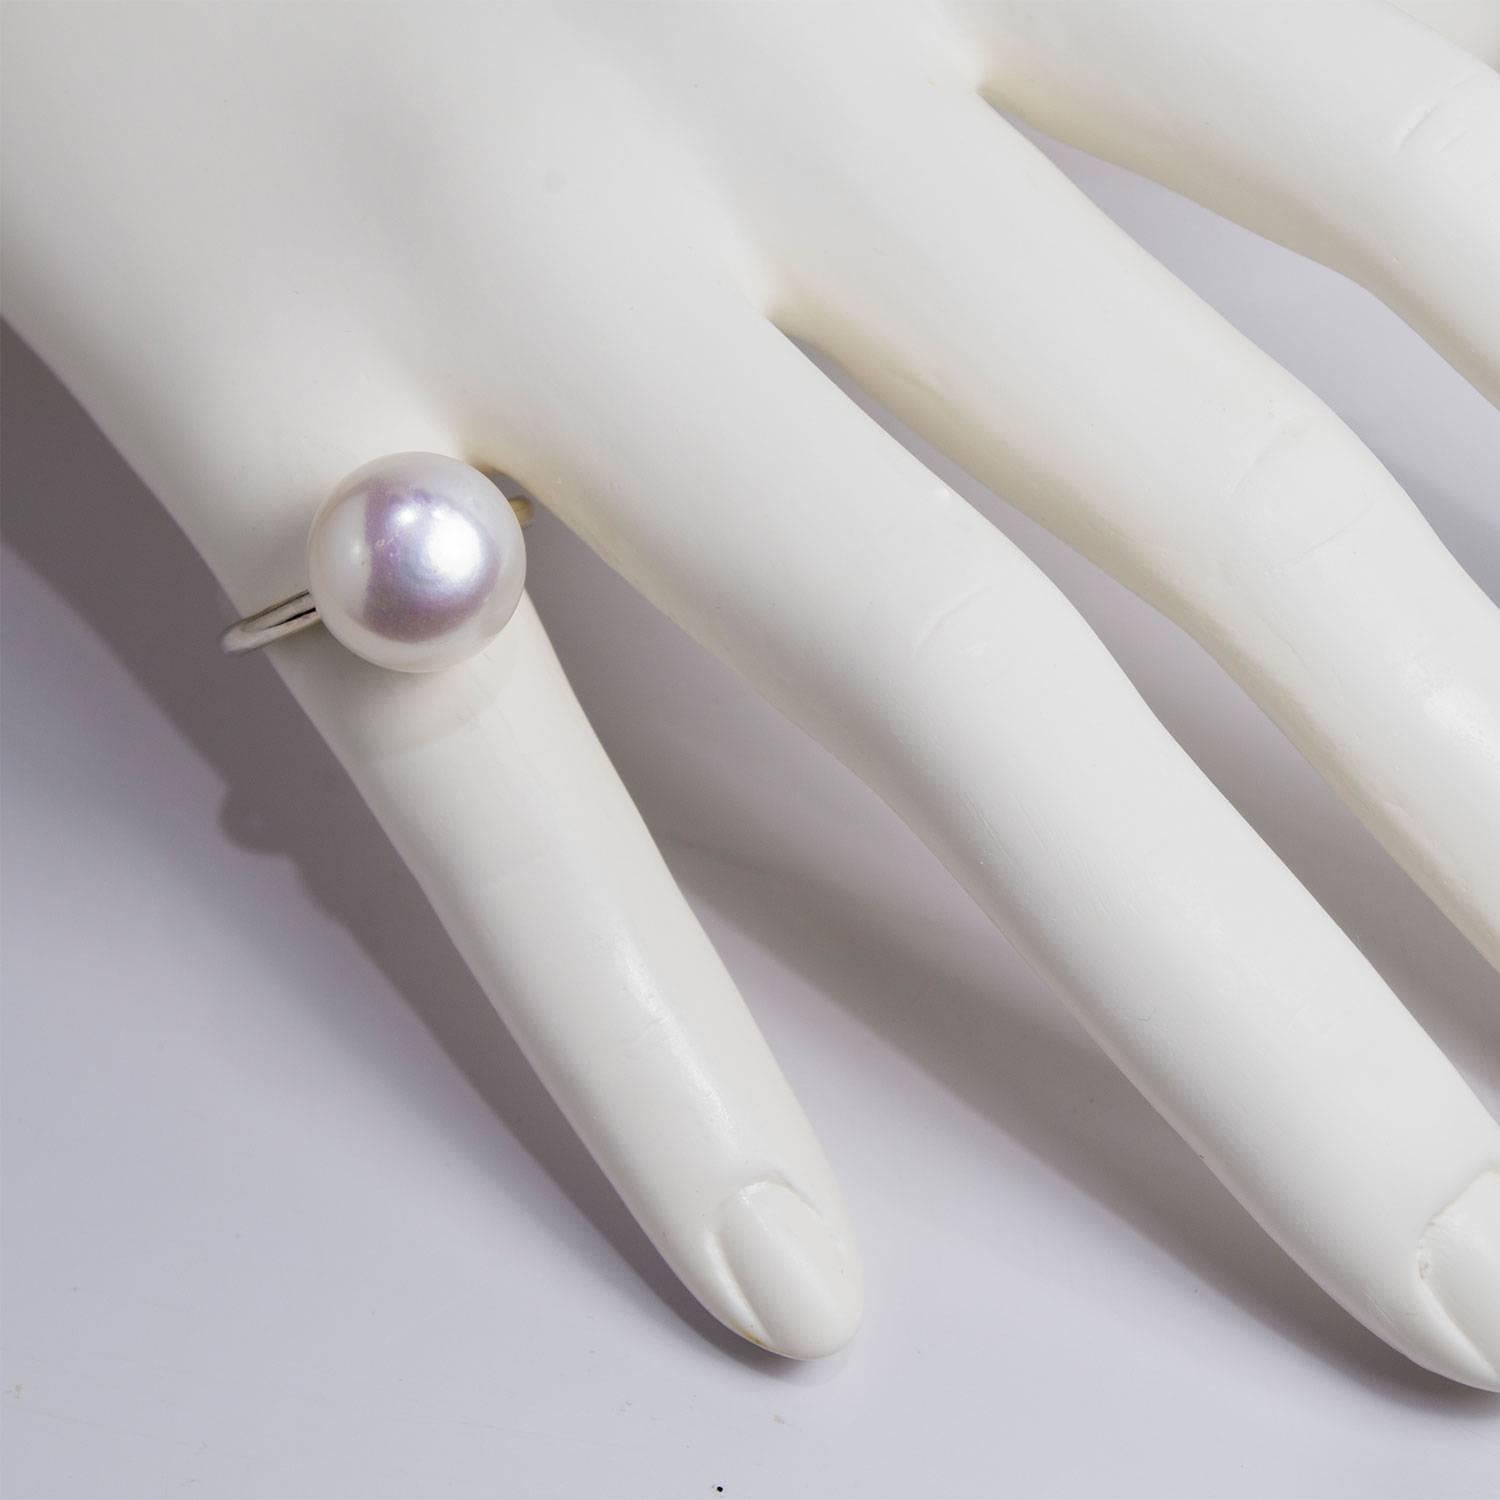 Whether your look is classic and elegant or casual and chic, Faye Kim's single pearl ring is the perfect accessory!  Wear alone or stack a few to create your own, unique style.  The white freshwater pearl is button-shaped and generous in size with